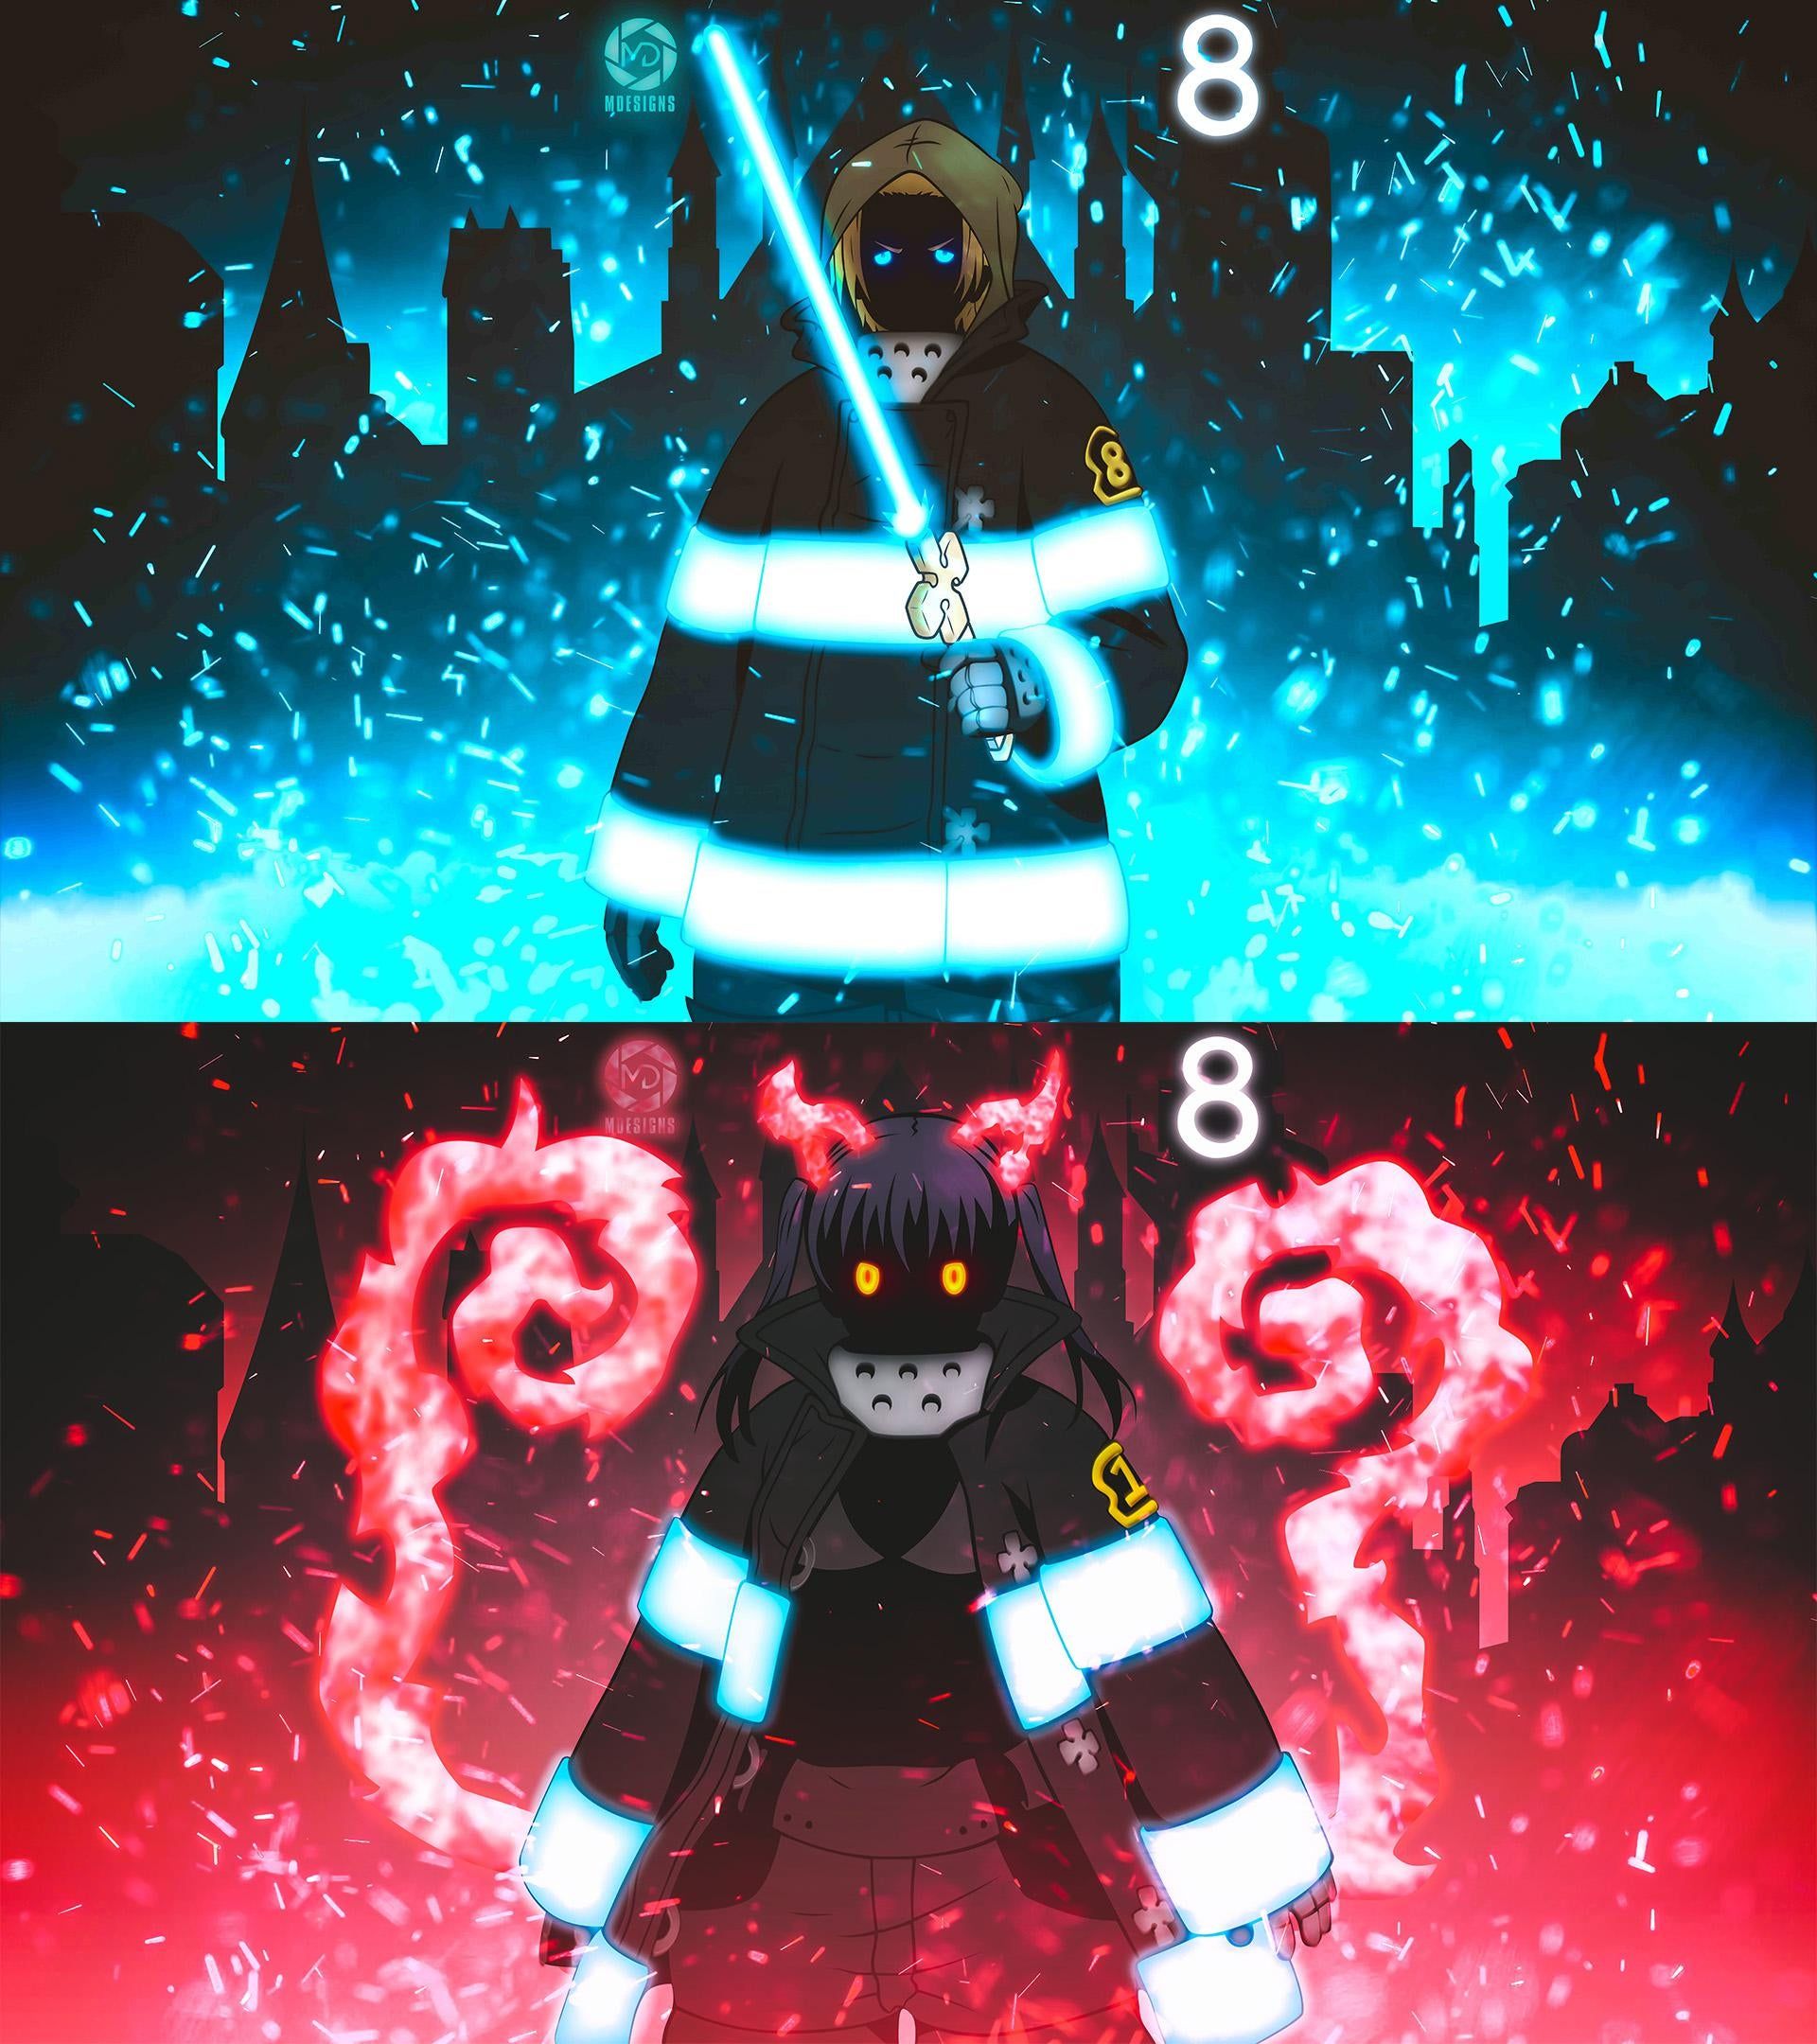 I decided to make some more Fire Force Wallpaper, after the good feedback I got from the last ones it got me all fired up